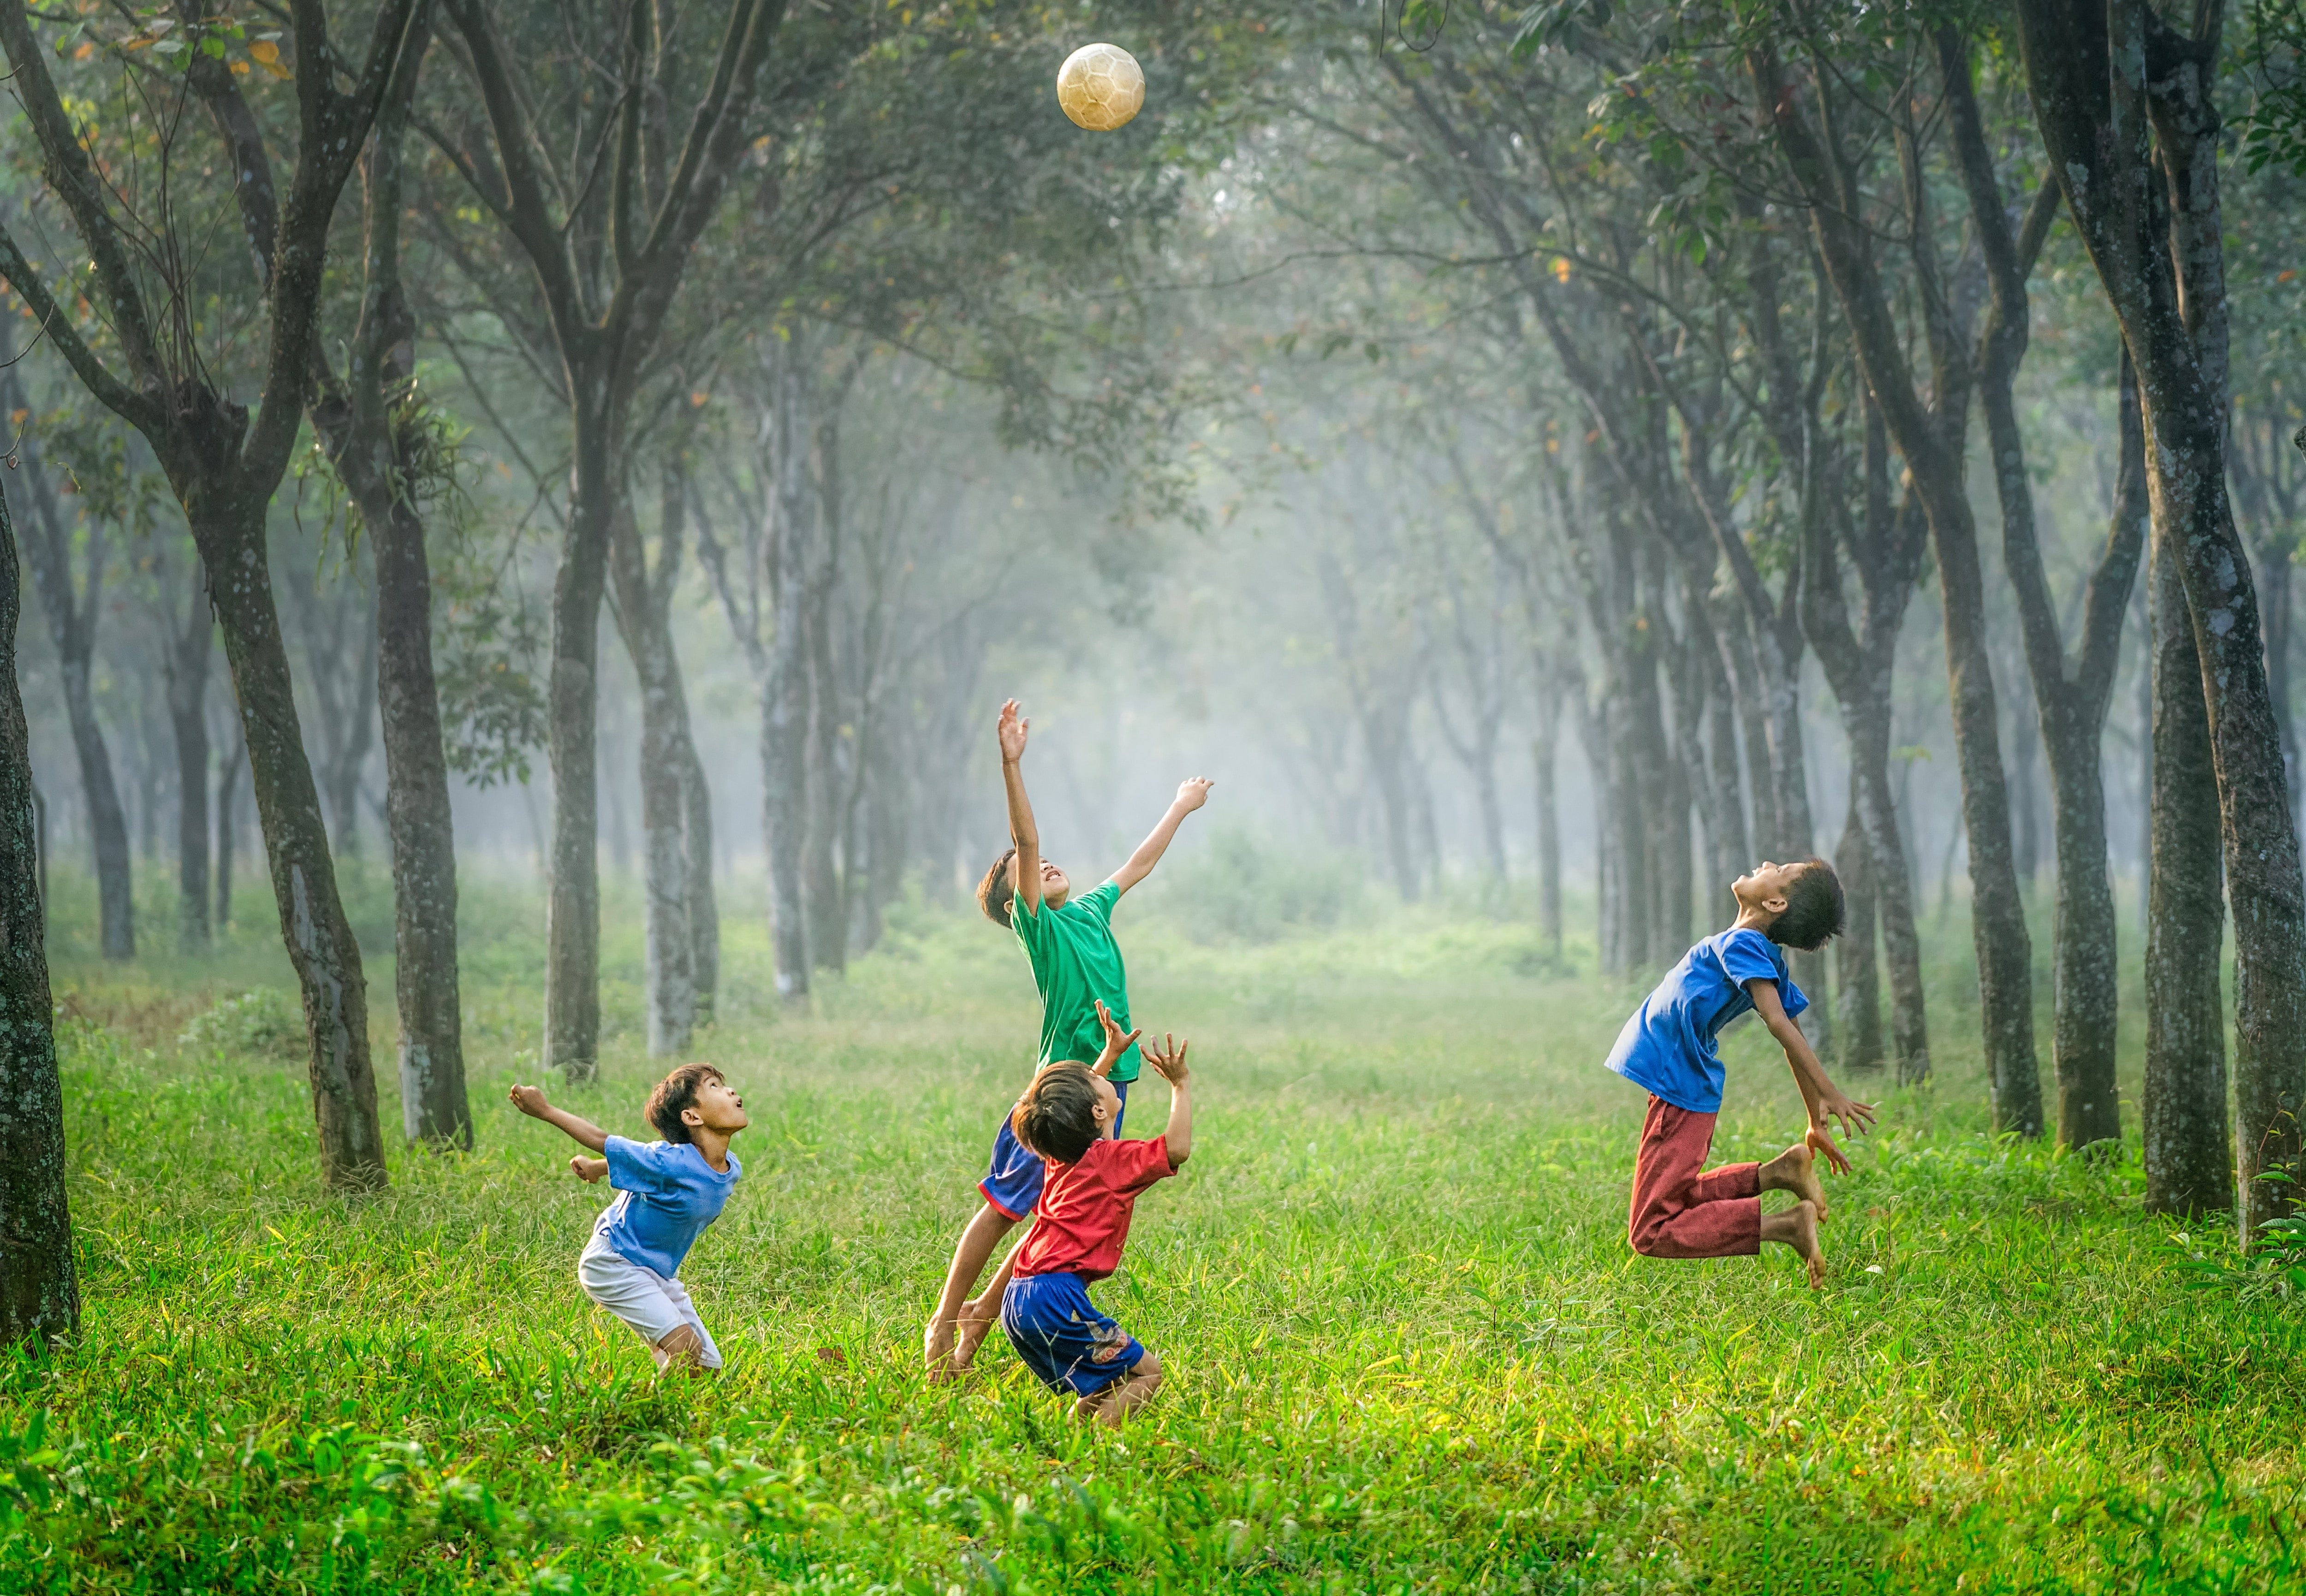 Kids Playing With a Ball Outside in Field with Trees - Sibling Photoshoot Idea